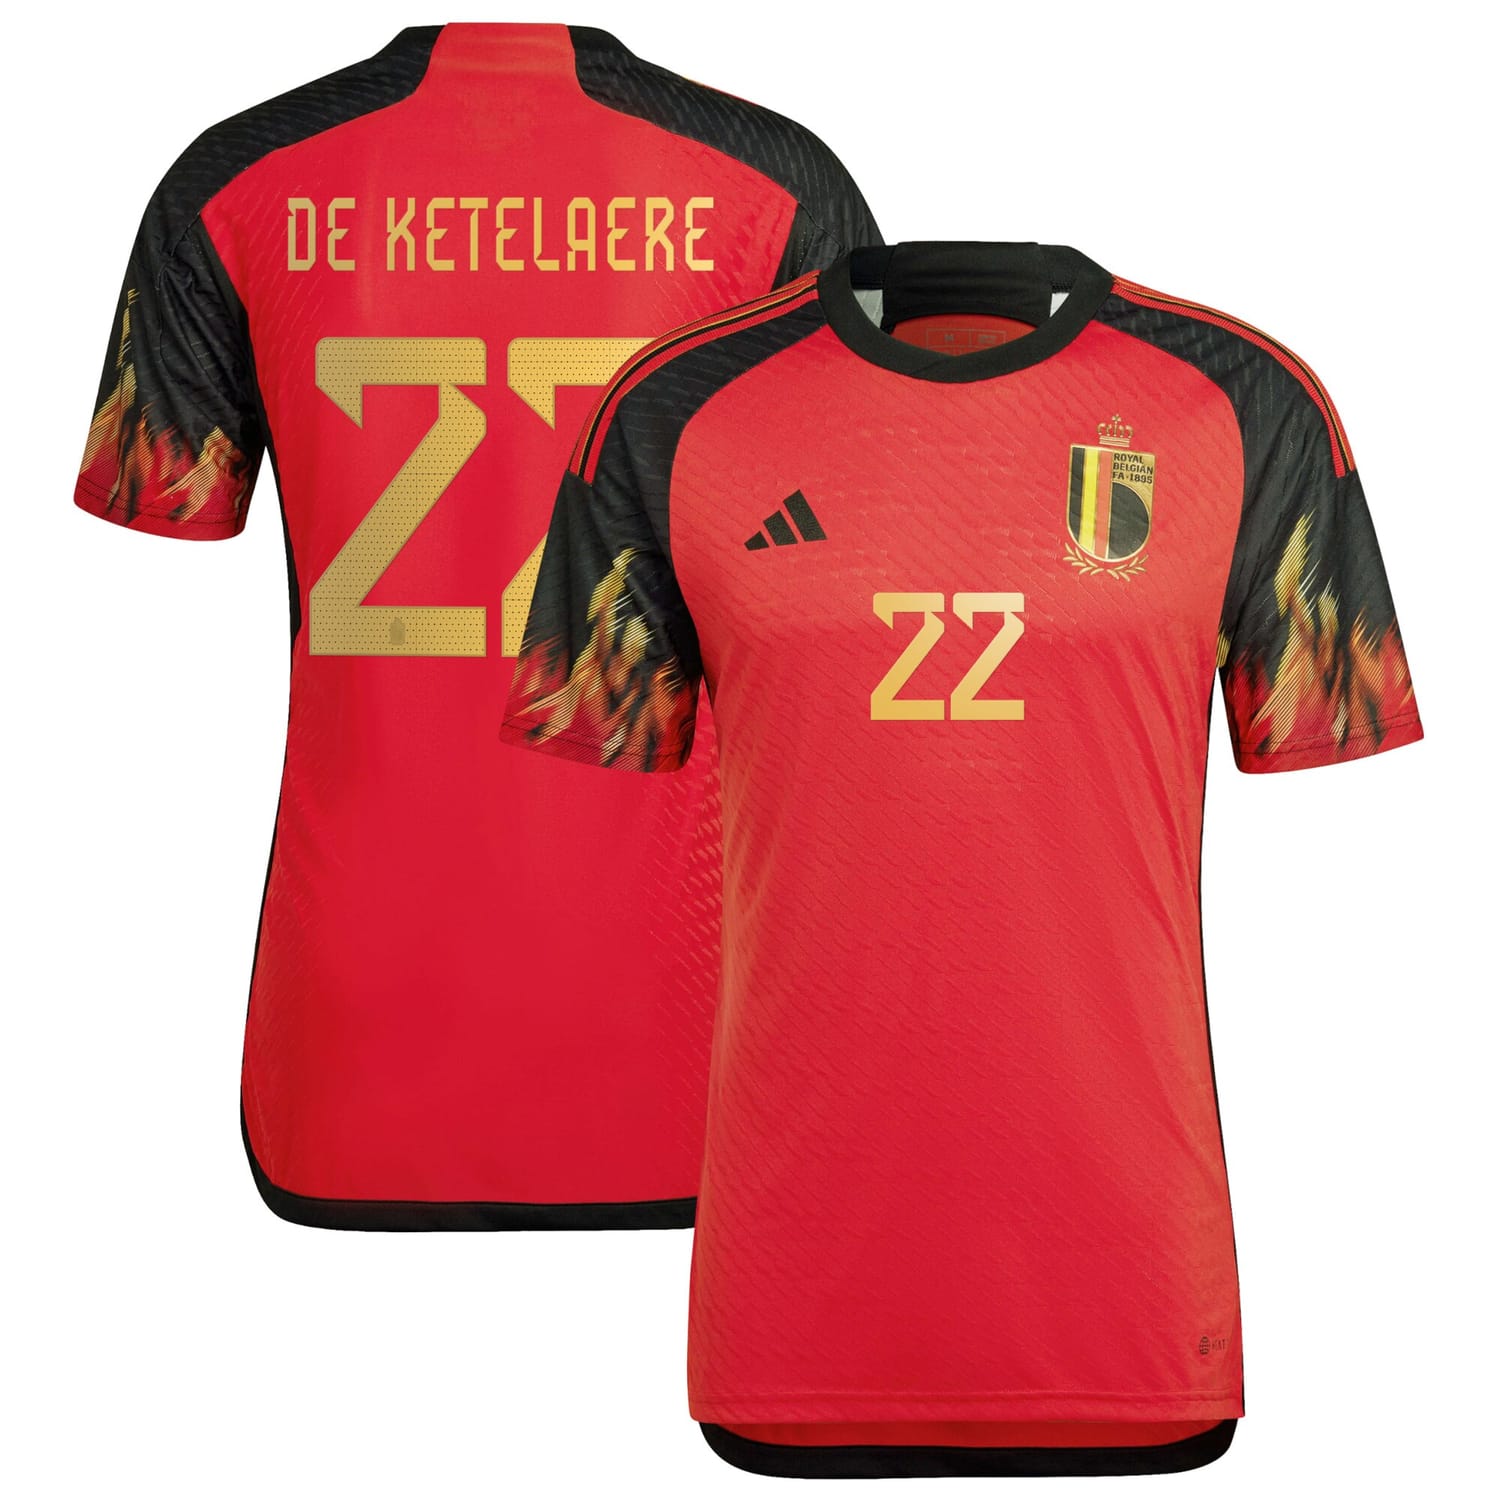 Belgium National Team Home Authentic Jersey Shirt 2022 player Charles De Ketelaere 22 printing for Men